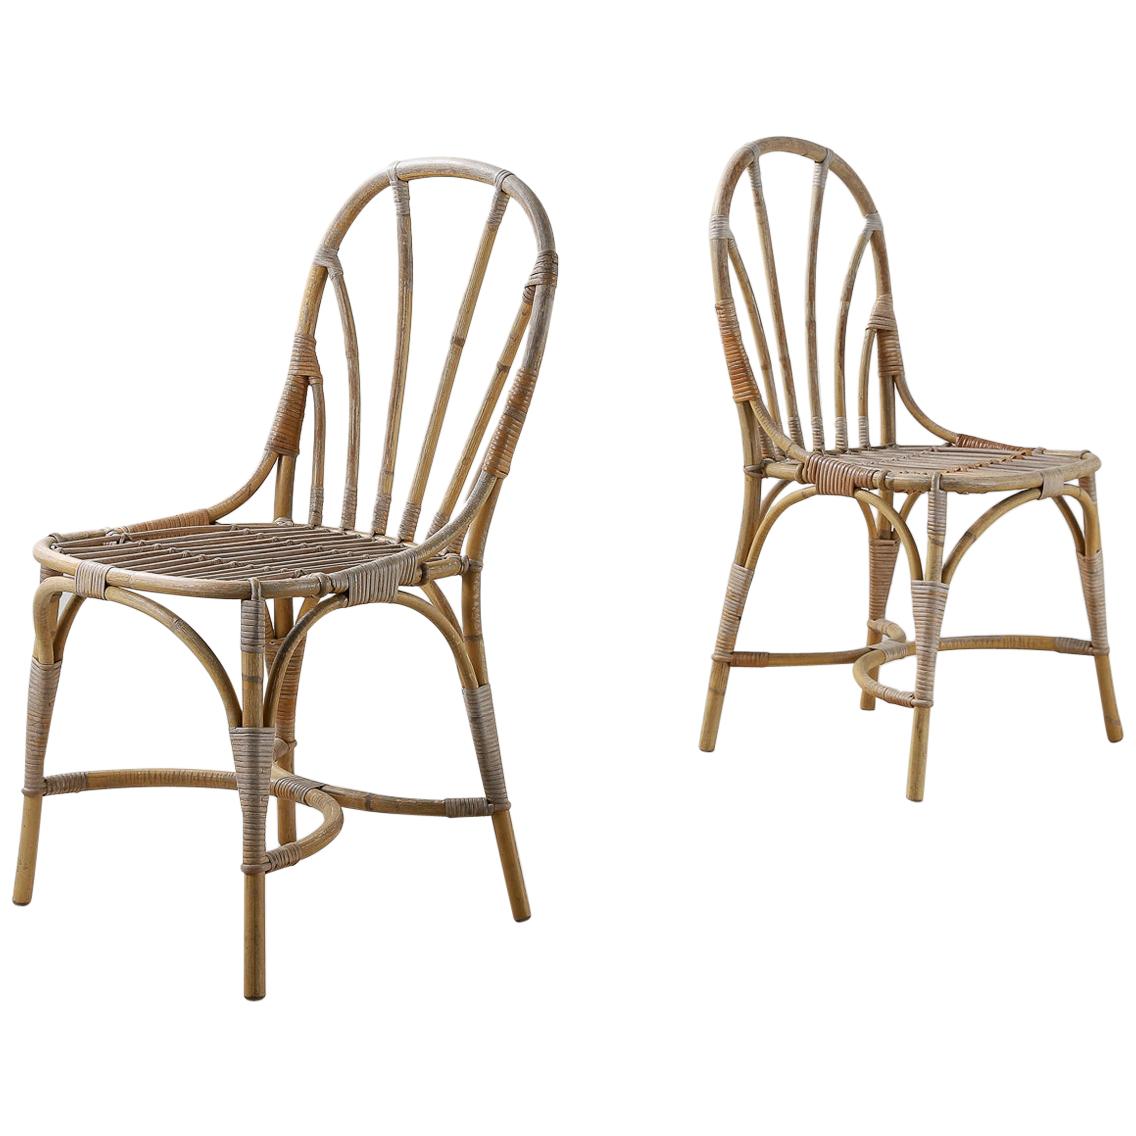 Pair of Bamboo & Rattan Chairs by Josef Frank For Sale